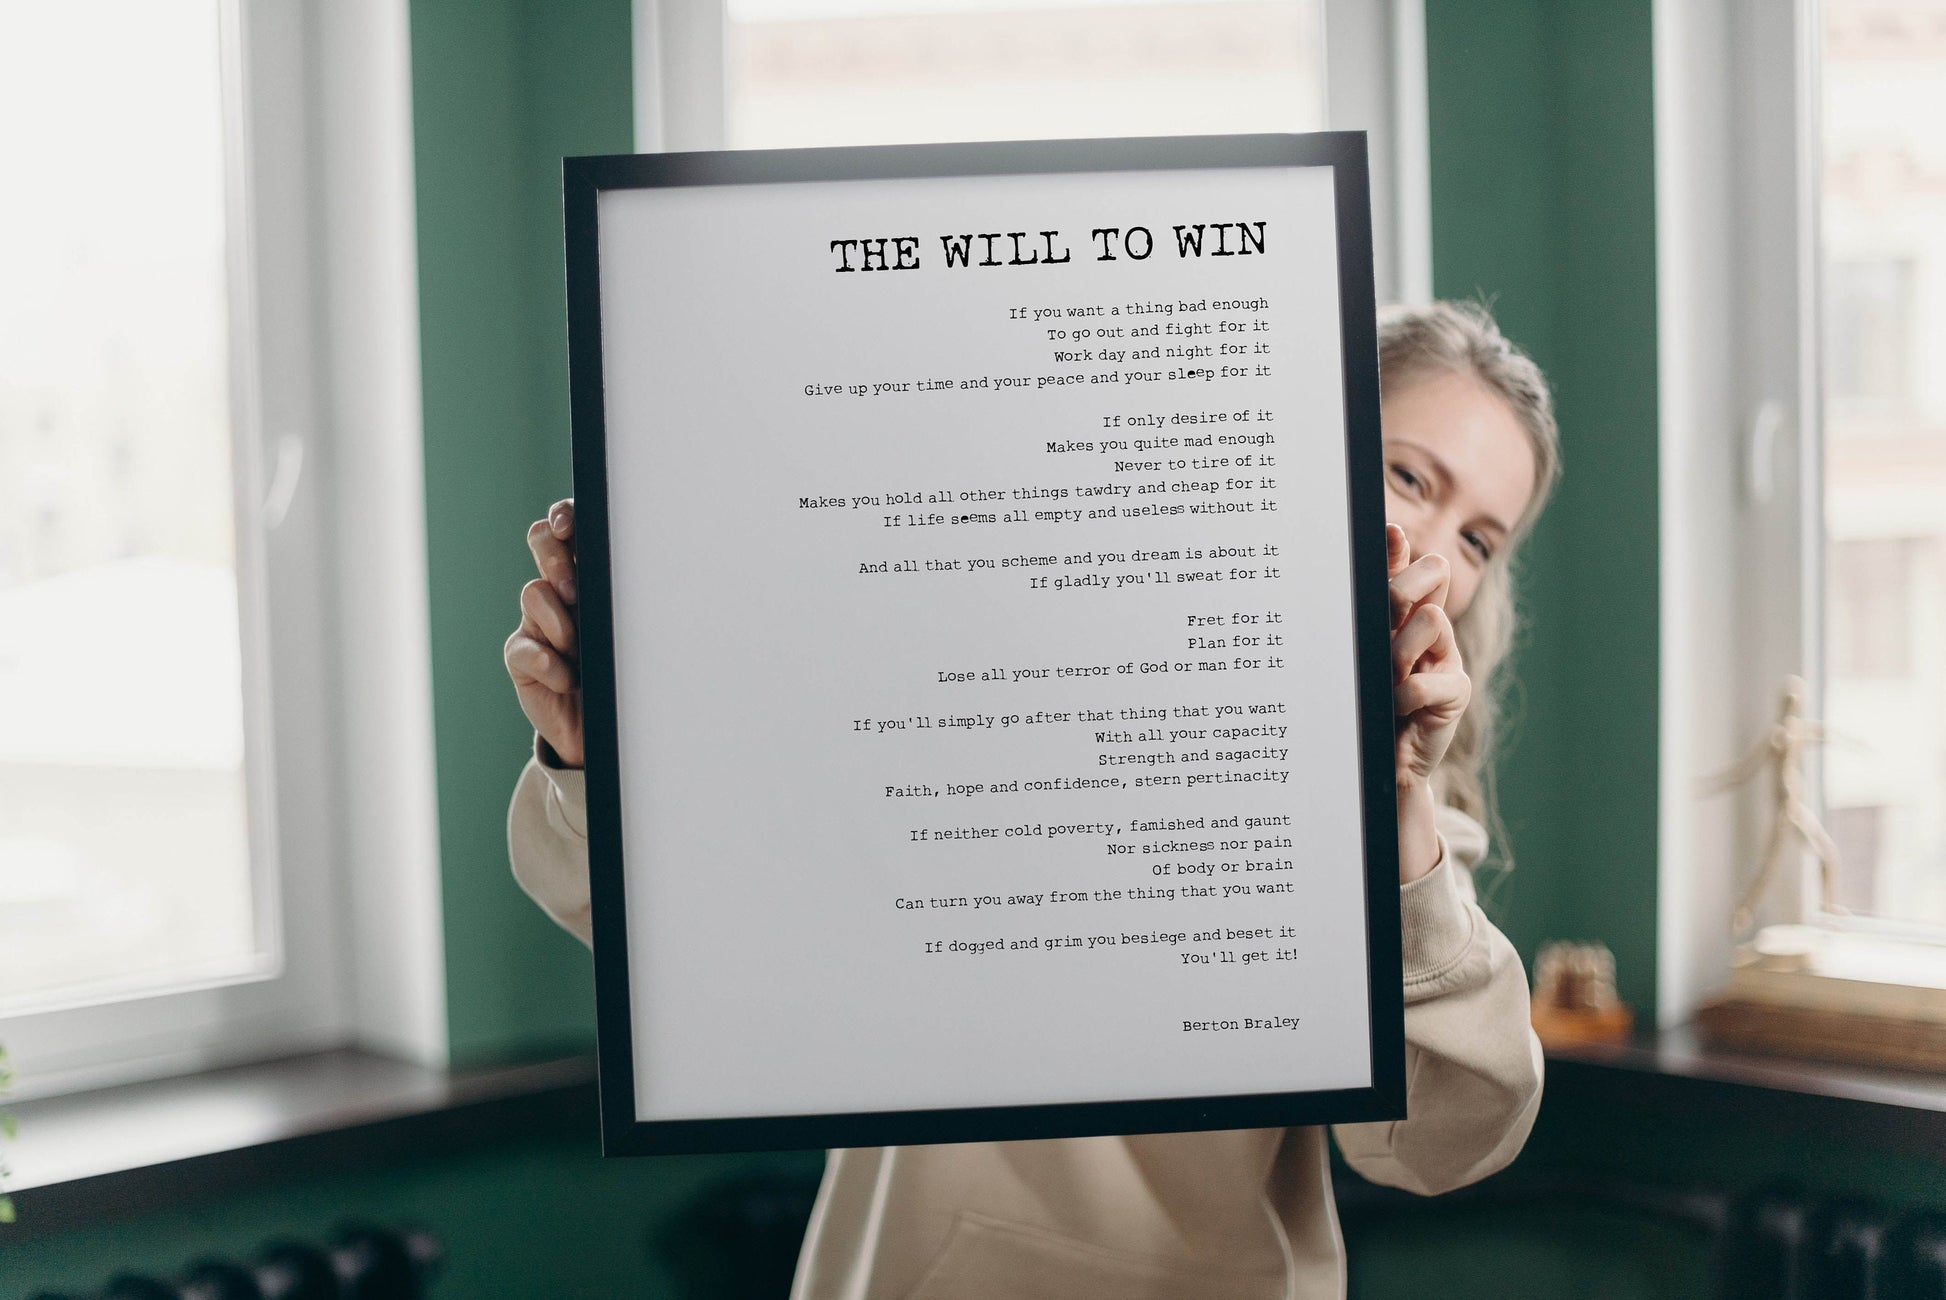 The Will to Win Print Framed Poem by Berton Braley Poster - Great Literature - Winning Mentality - Inspirational speech